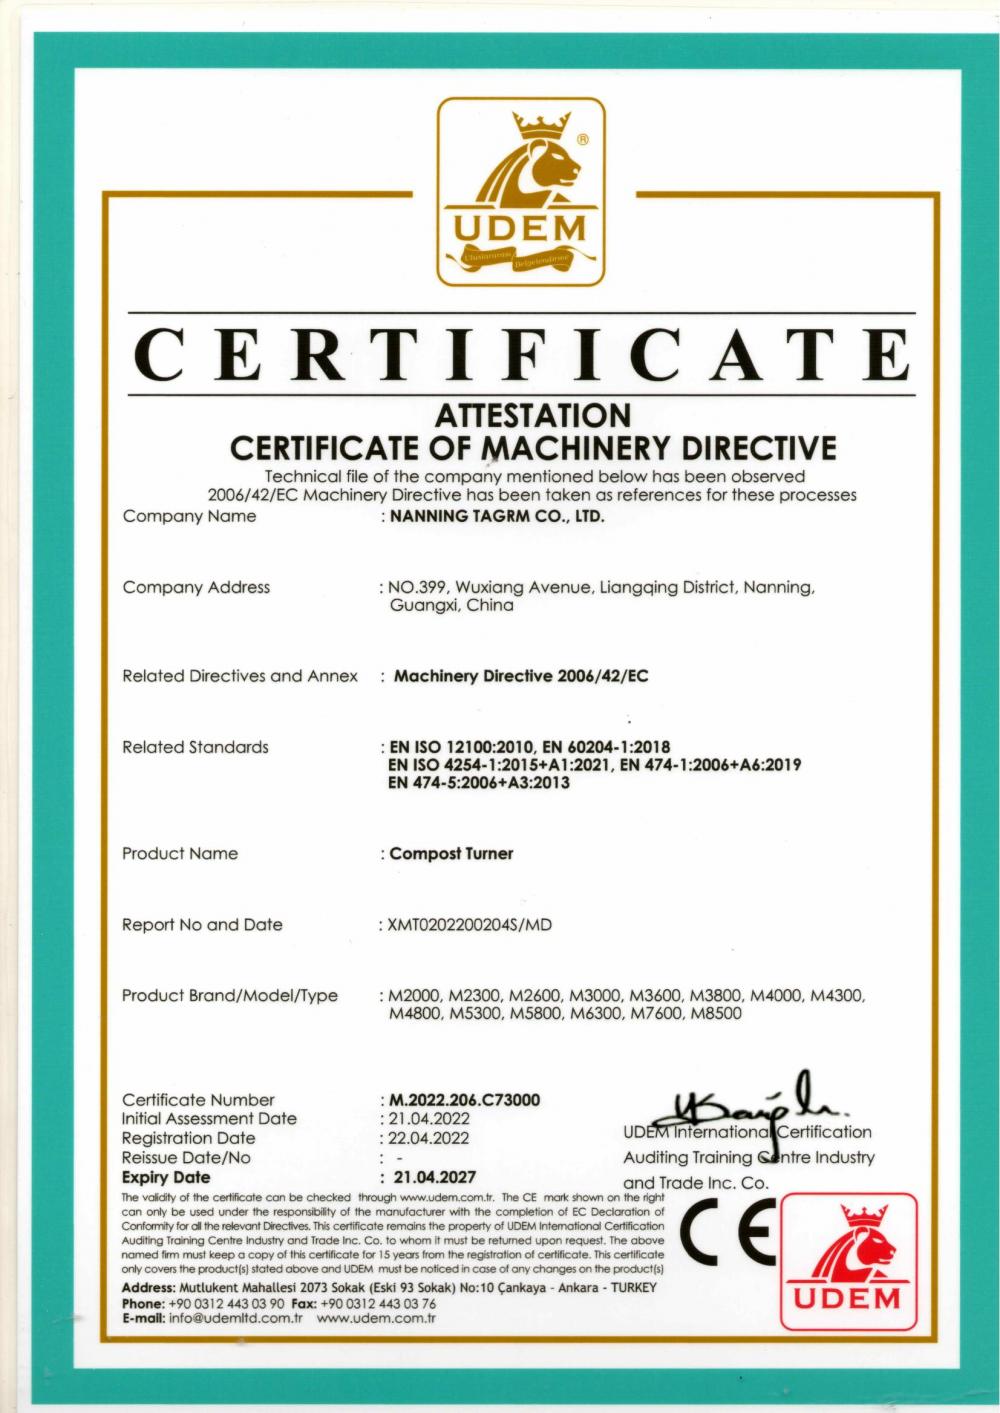 ATTESTATION CERTIFICATE OF MACHINERY DIRECTIVE